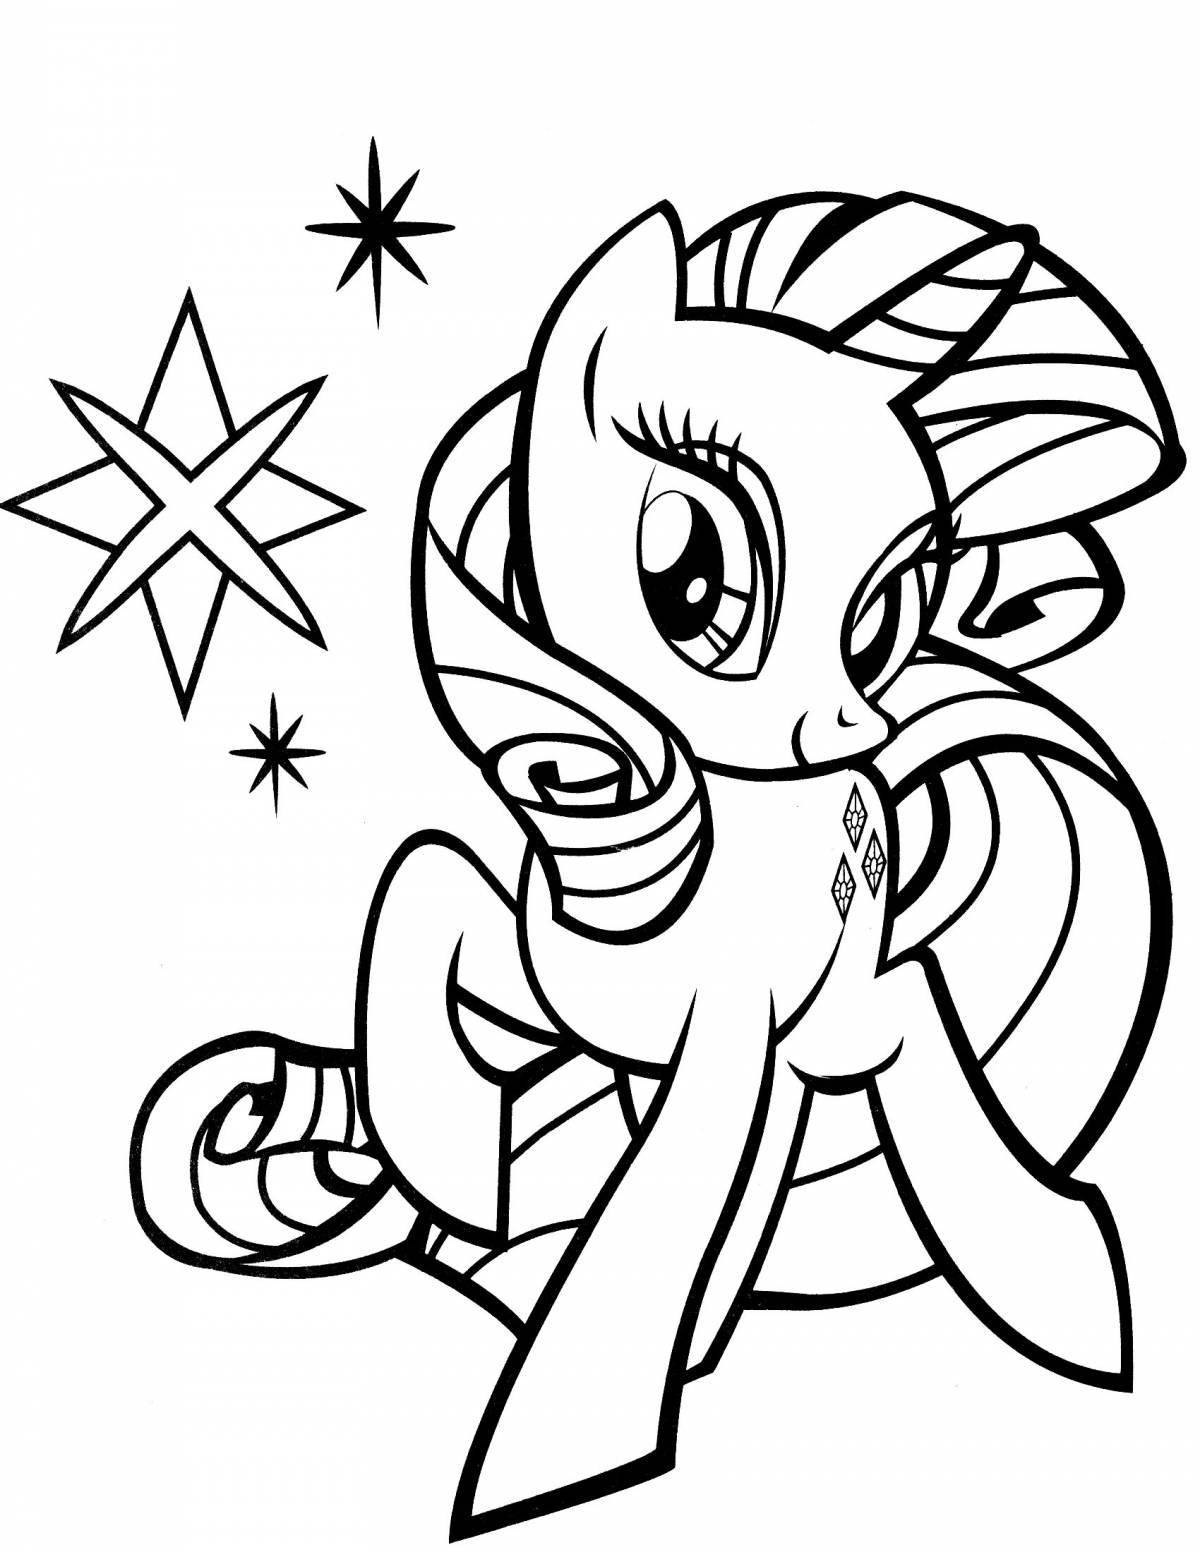 Shine pony coloring book for girls